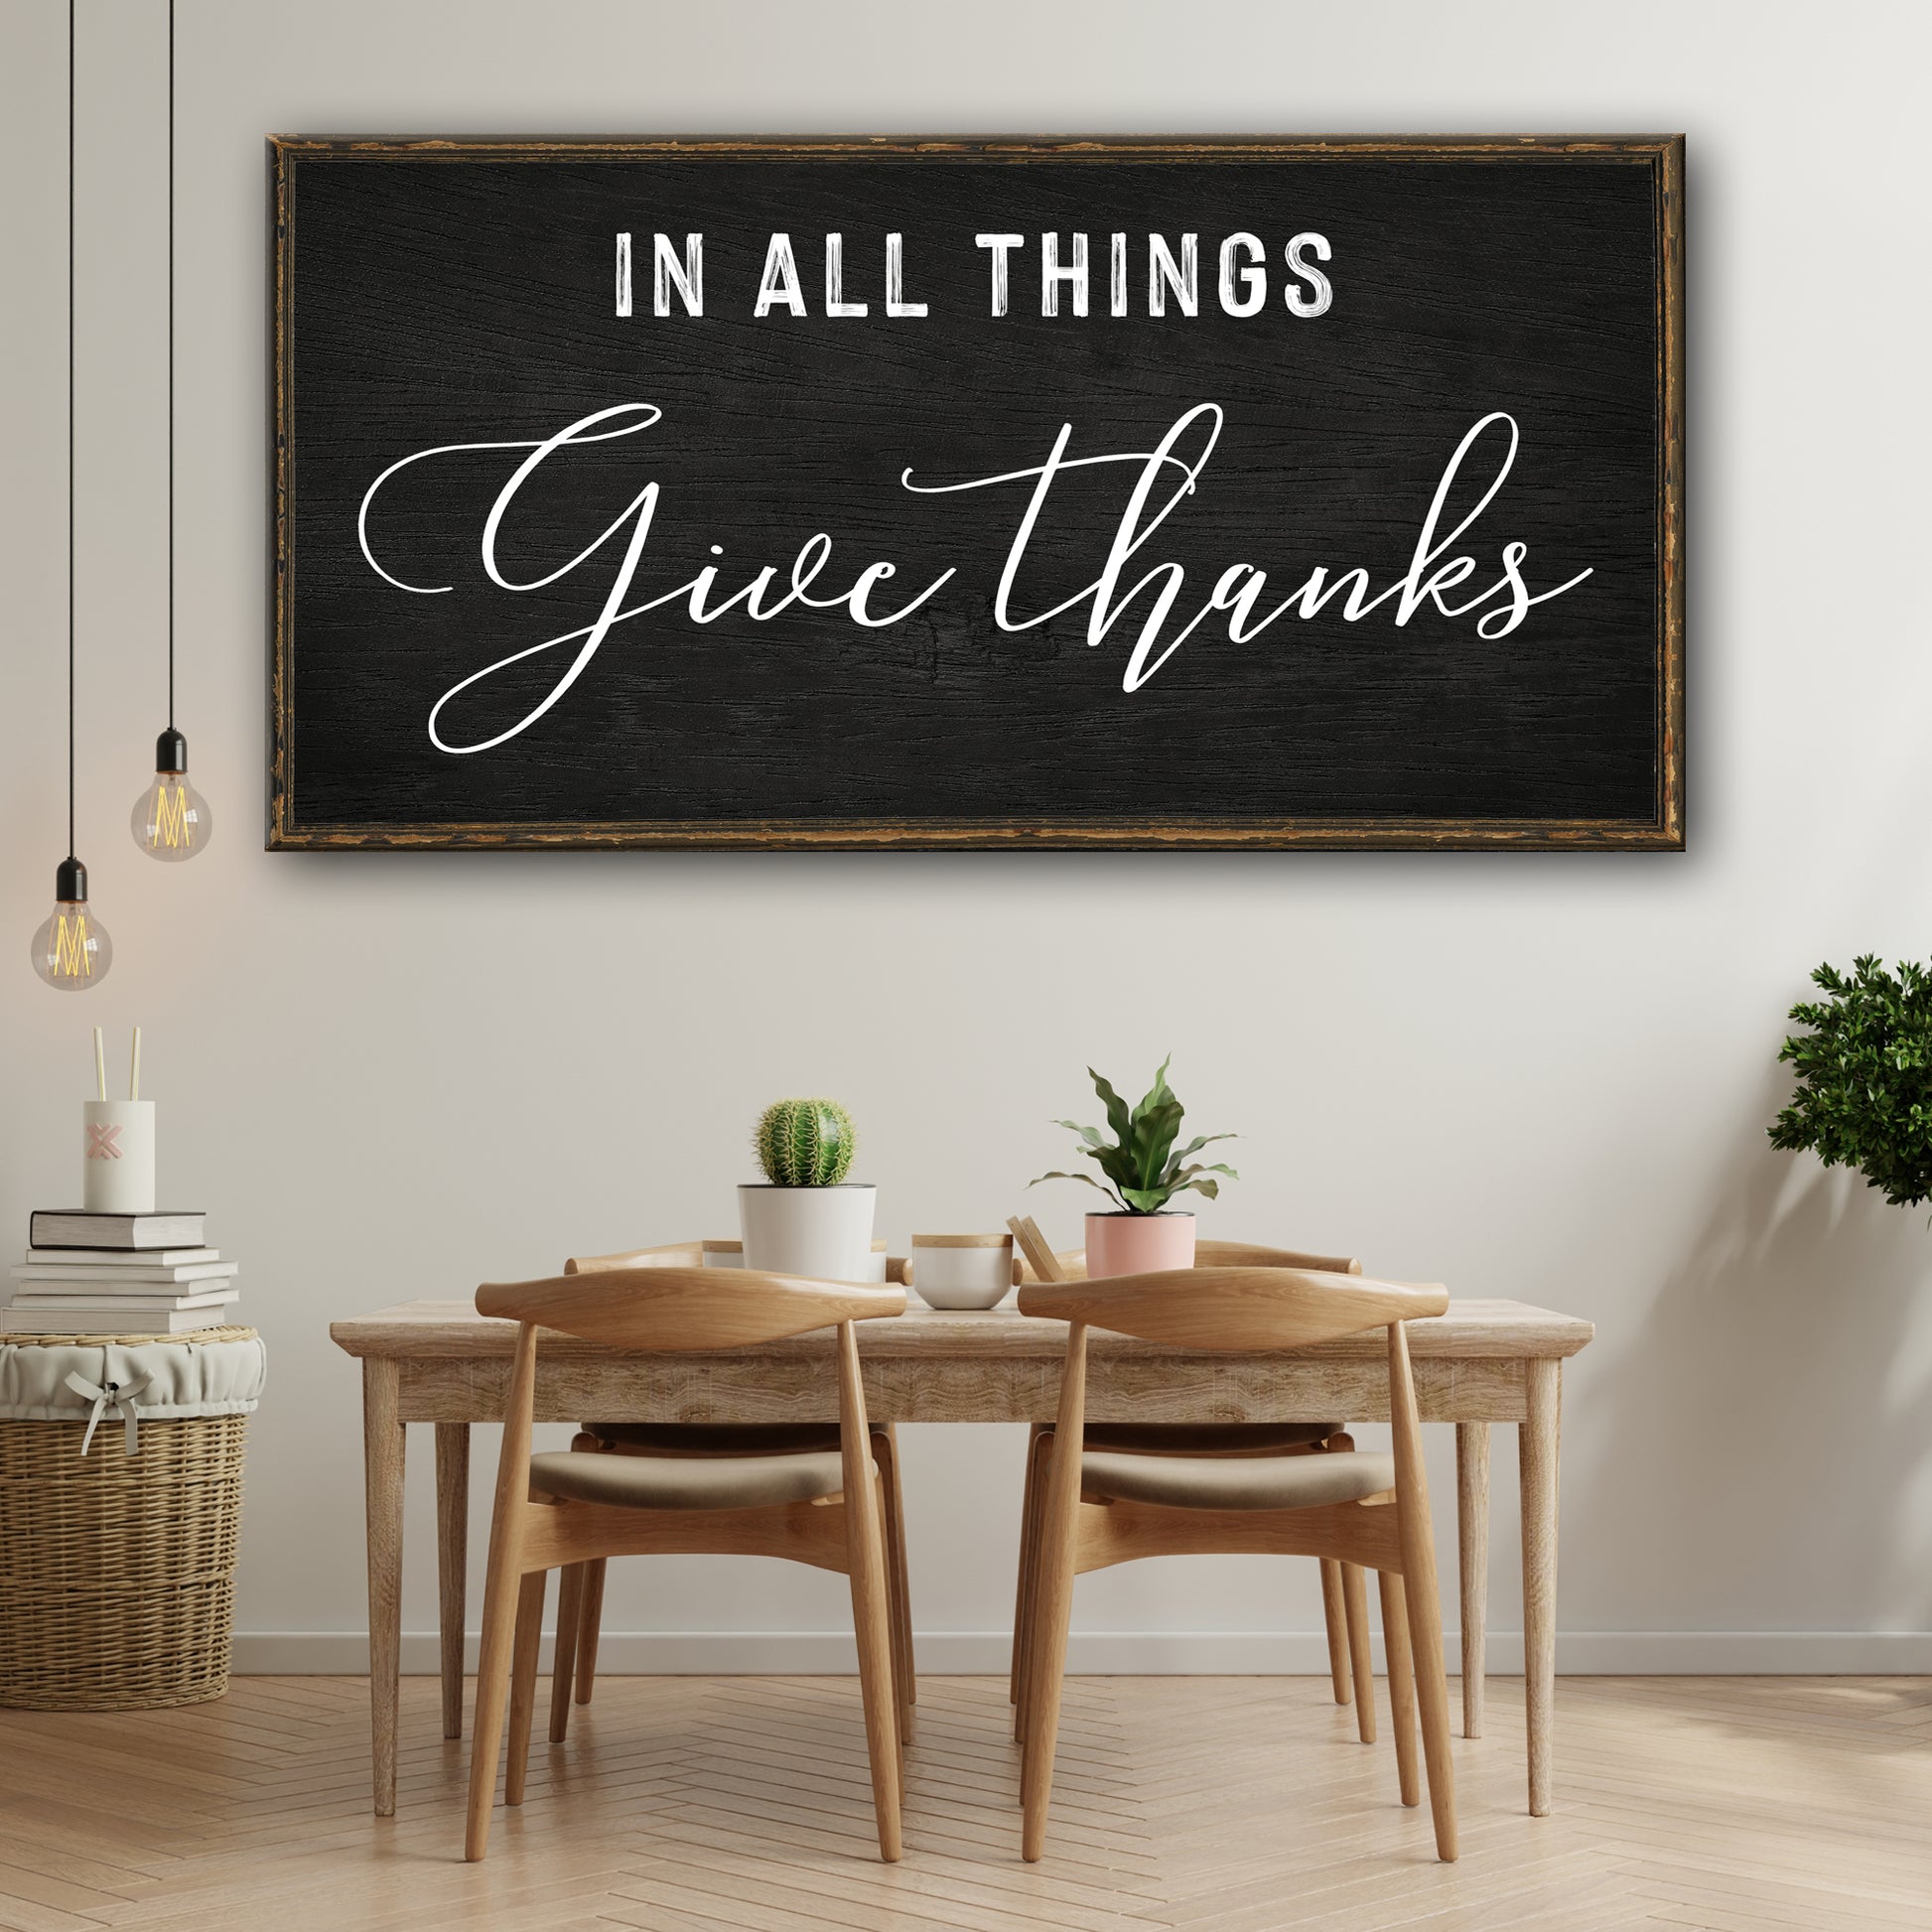 In All Things Give Thanks Sign - Image by Tailored Canvases